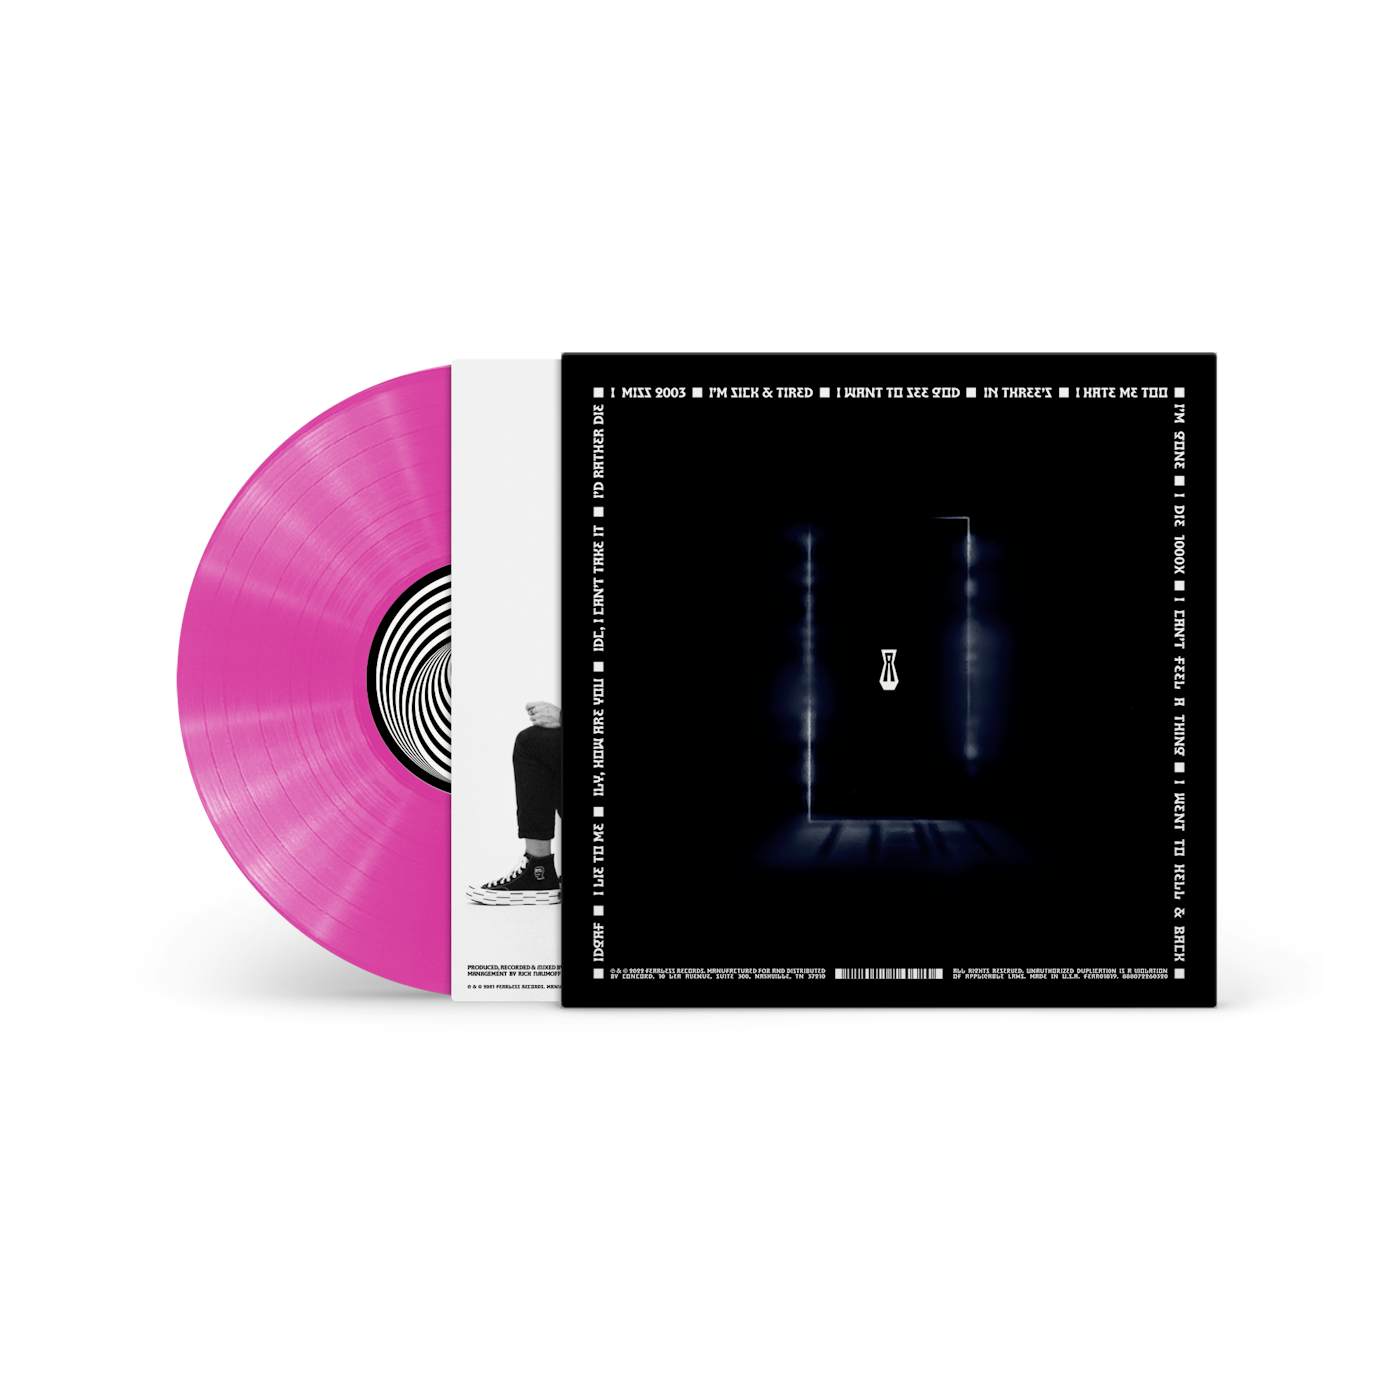 AS IT IS "I WENT TO HELL AND BACK" Pink Vinyl